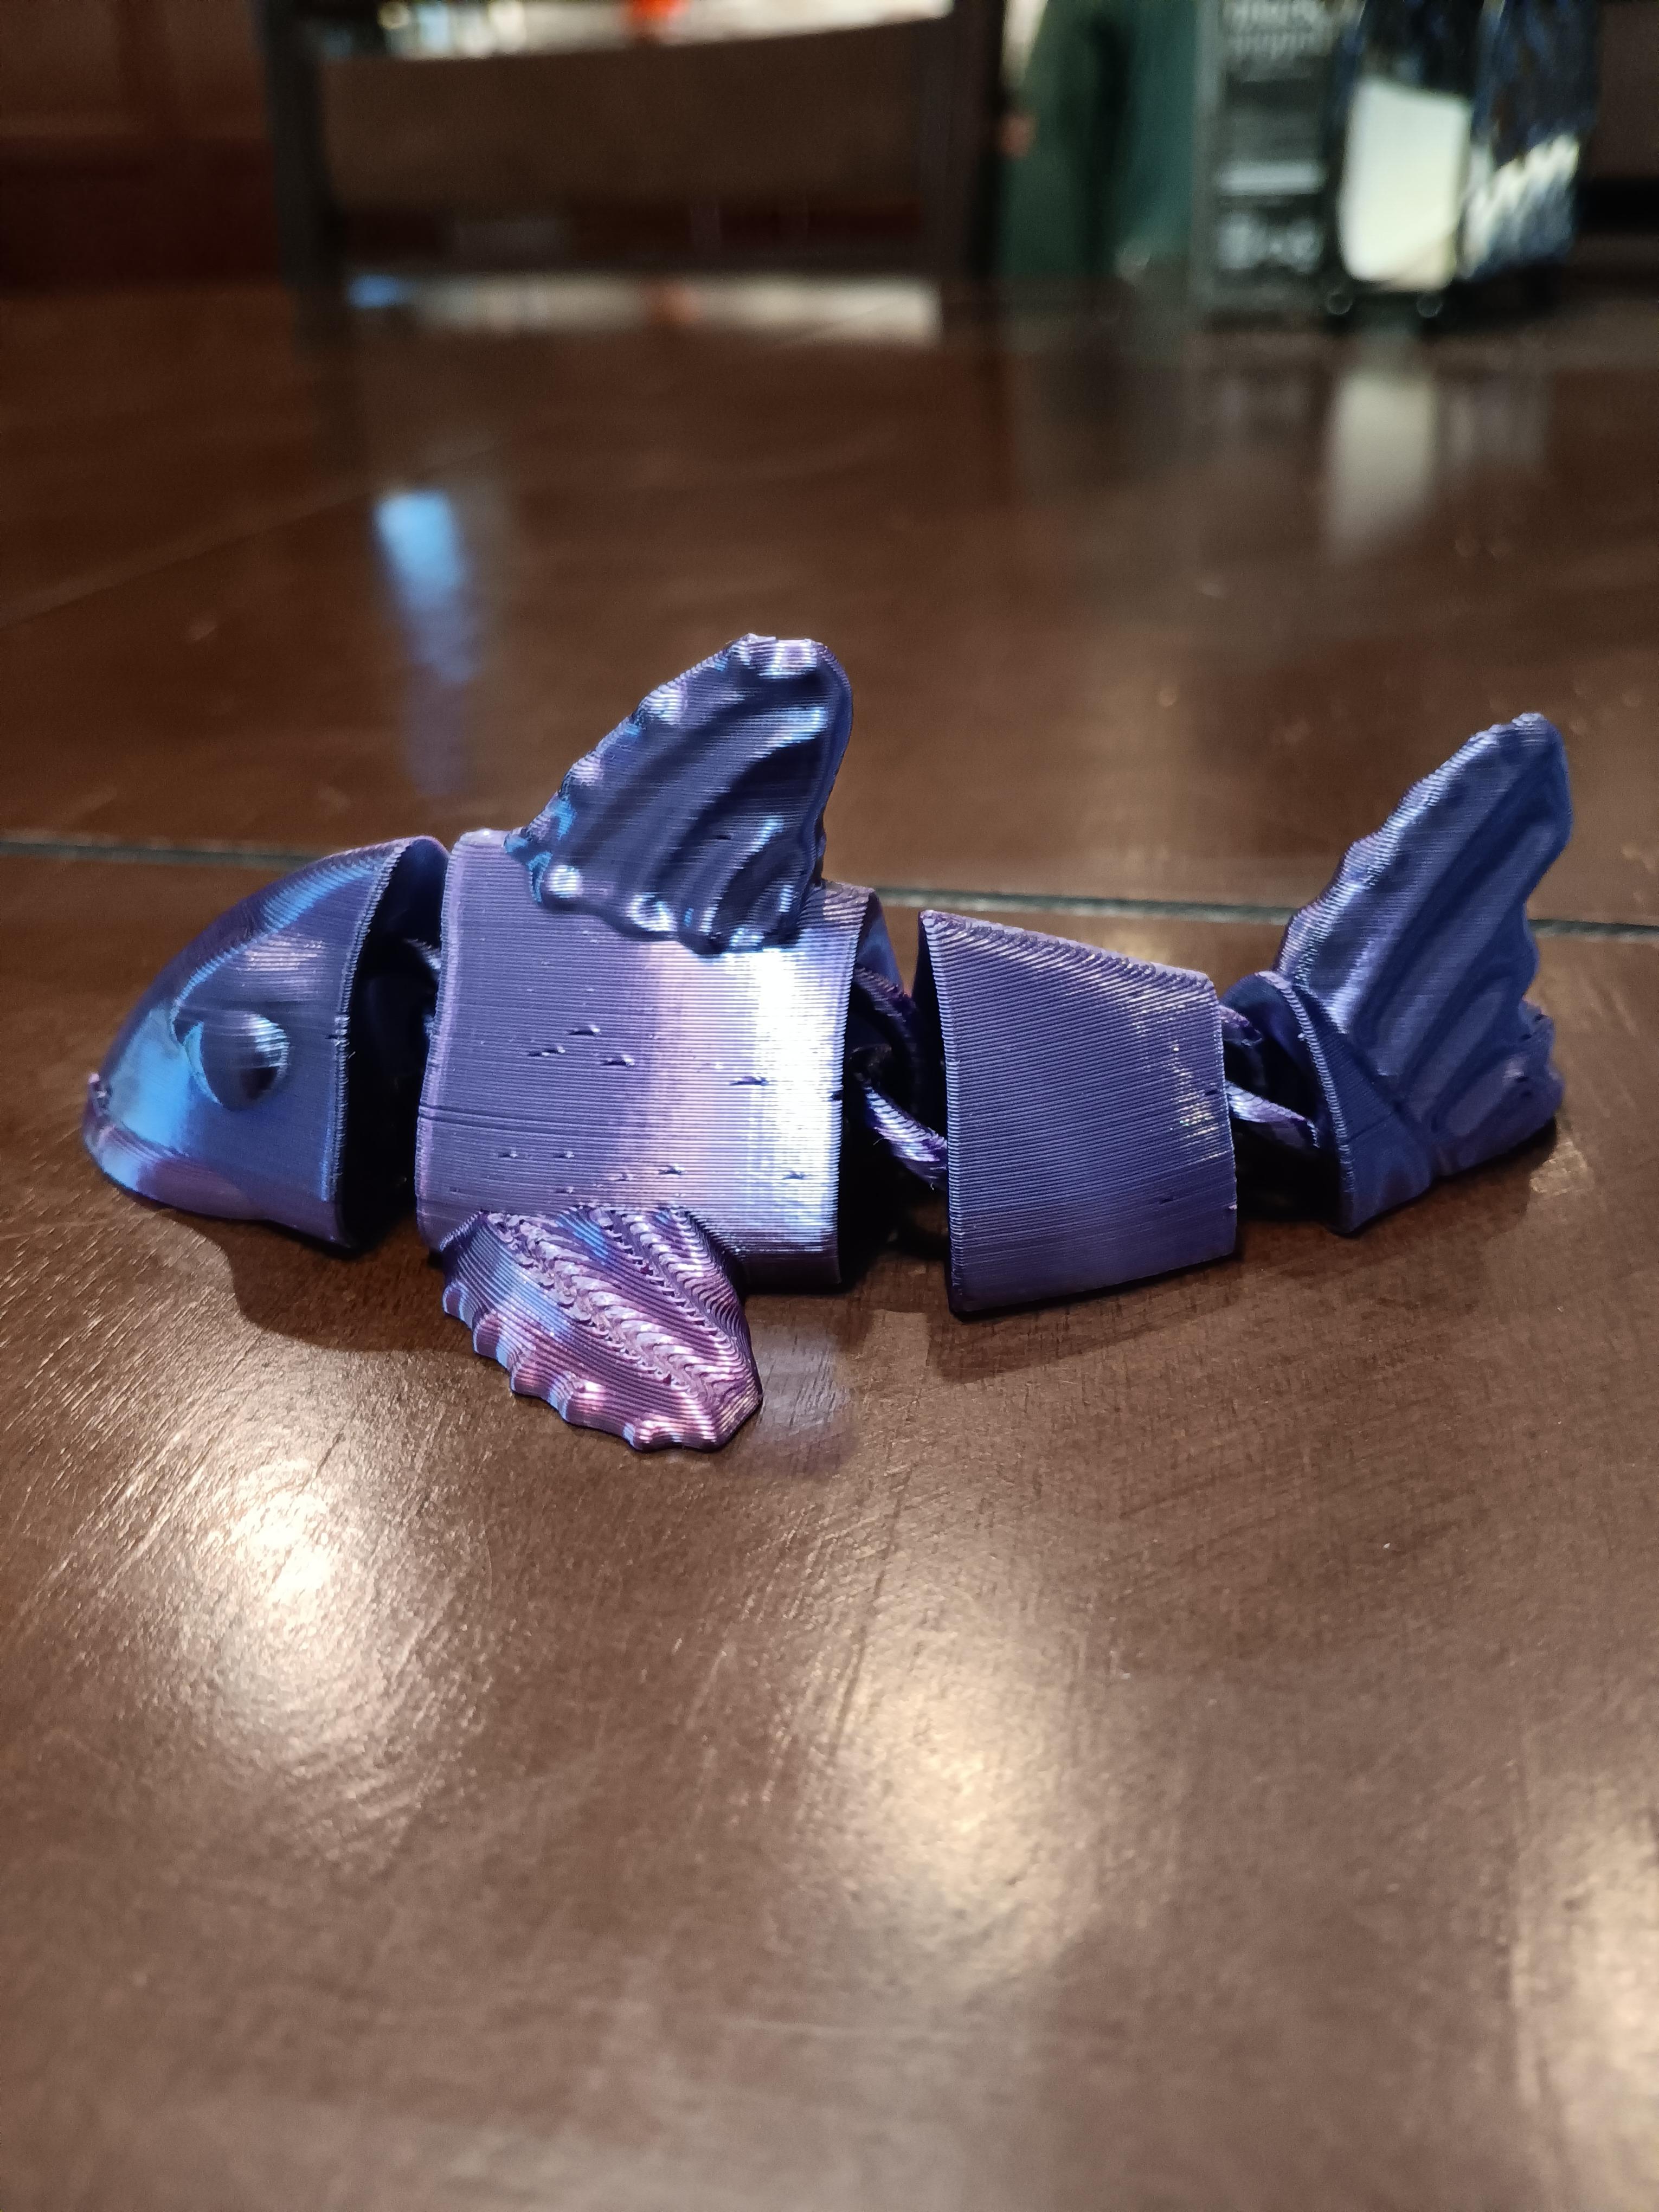 Flexi angry Koi fish - print in place - fidget toy 3d model